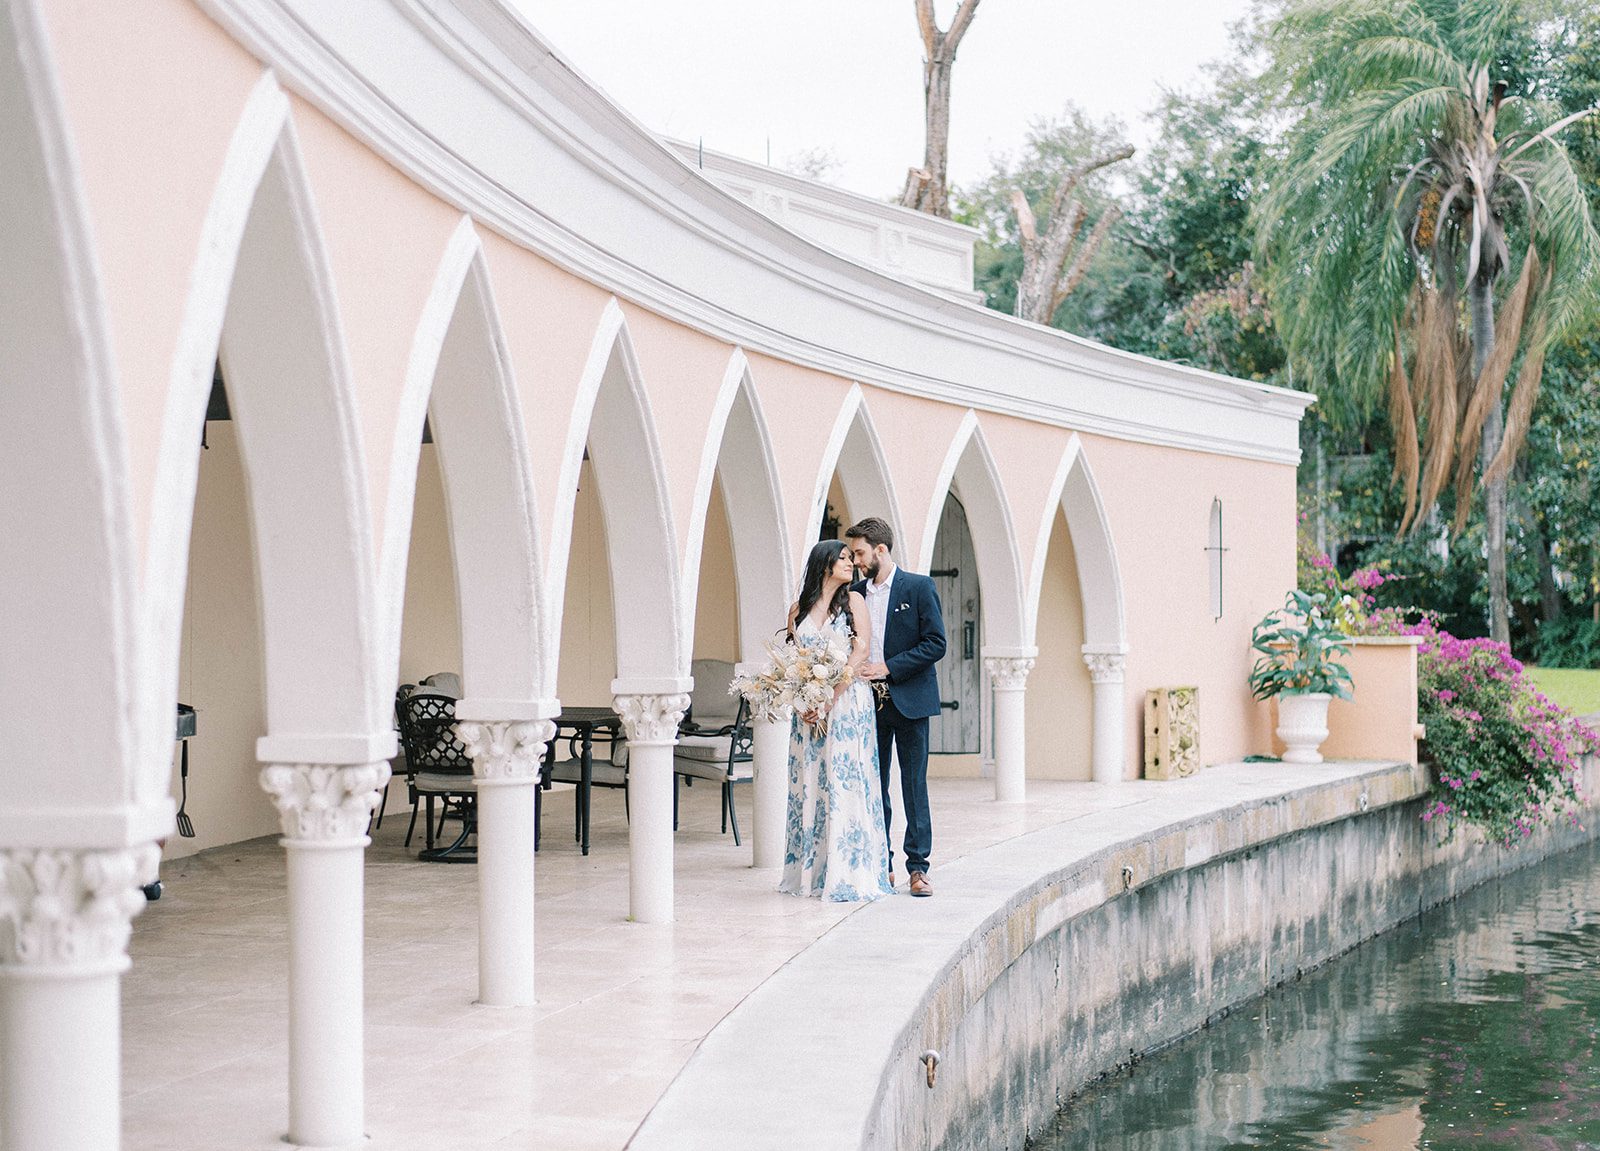 The Mirasol engagement photos in Tampa FLorida with man holding woman and leaning into her next to a water feature and beautiful hallway for arches outside